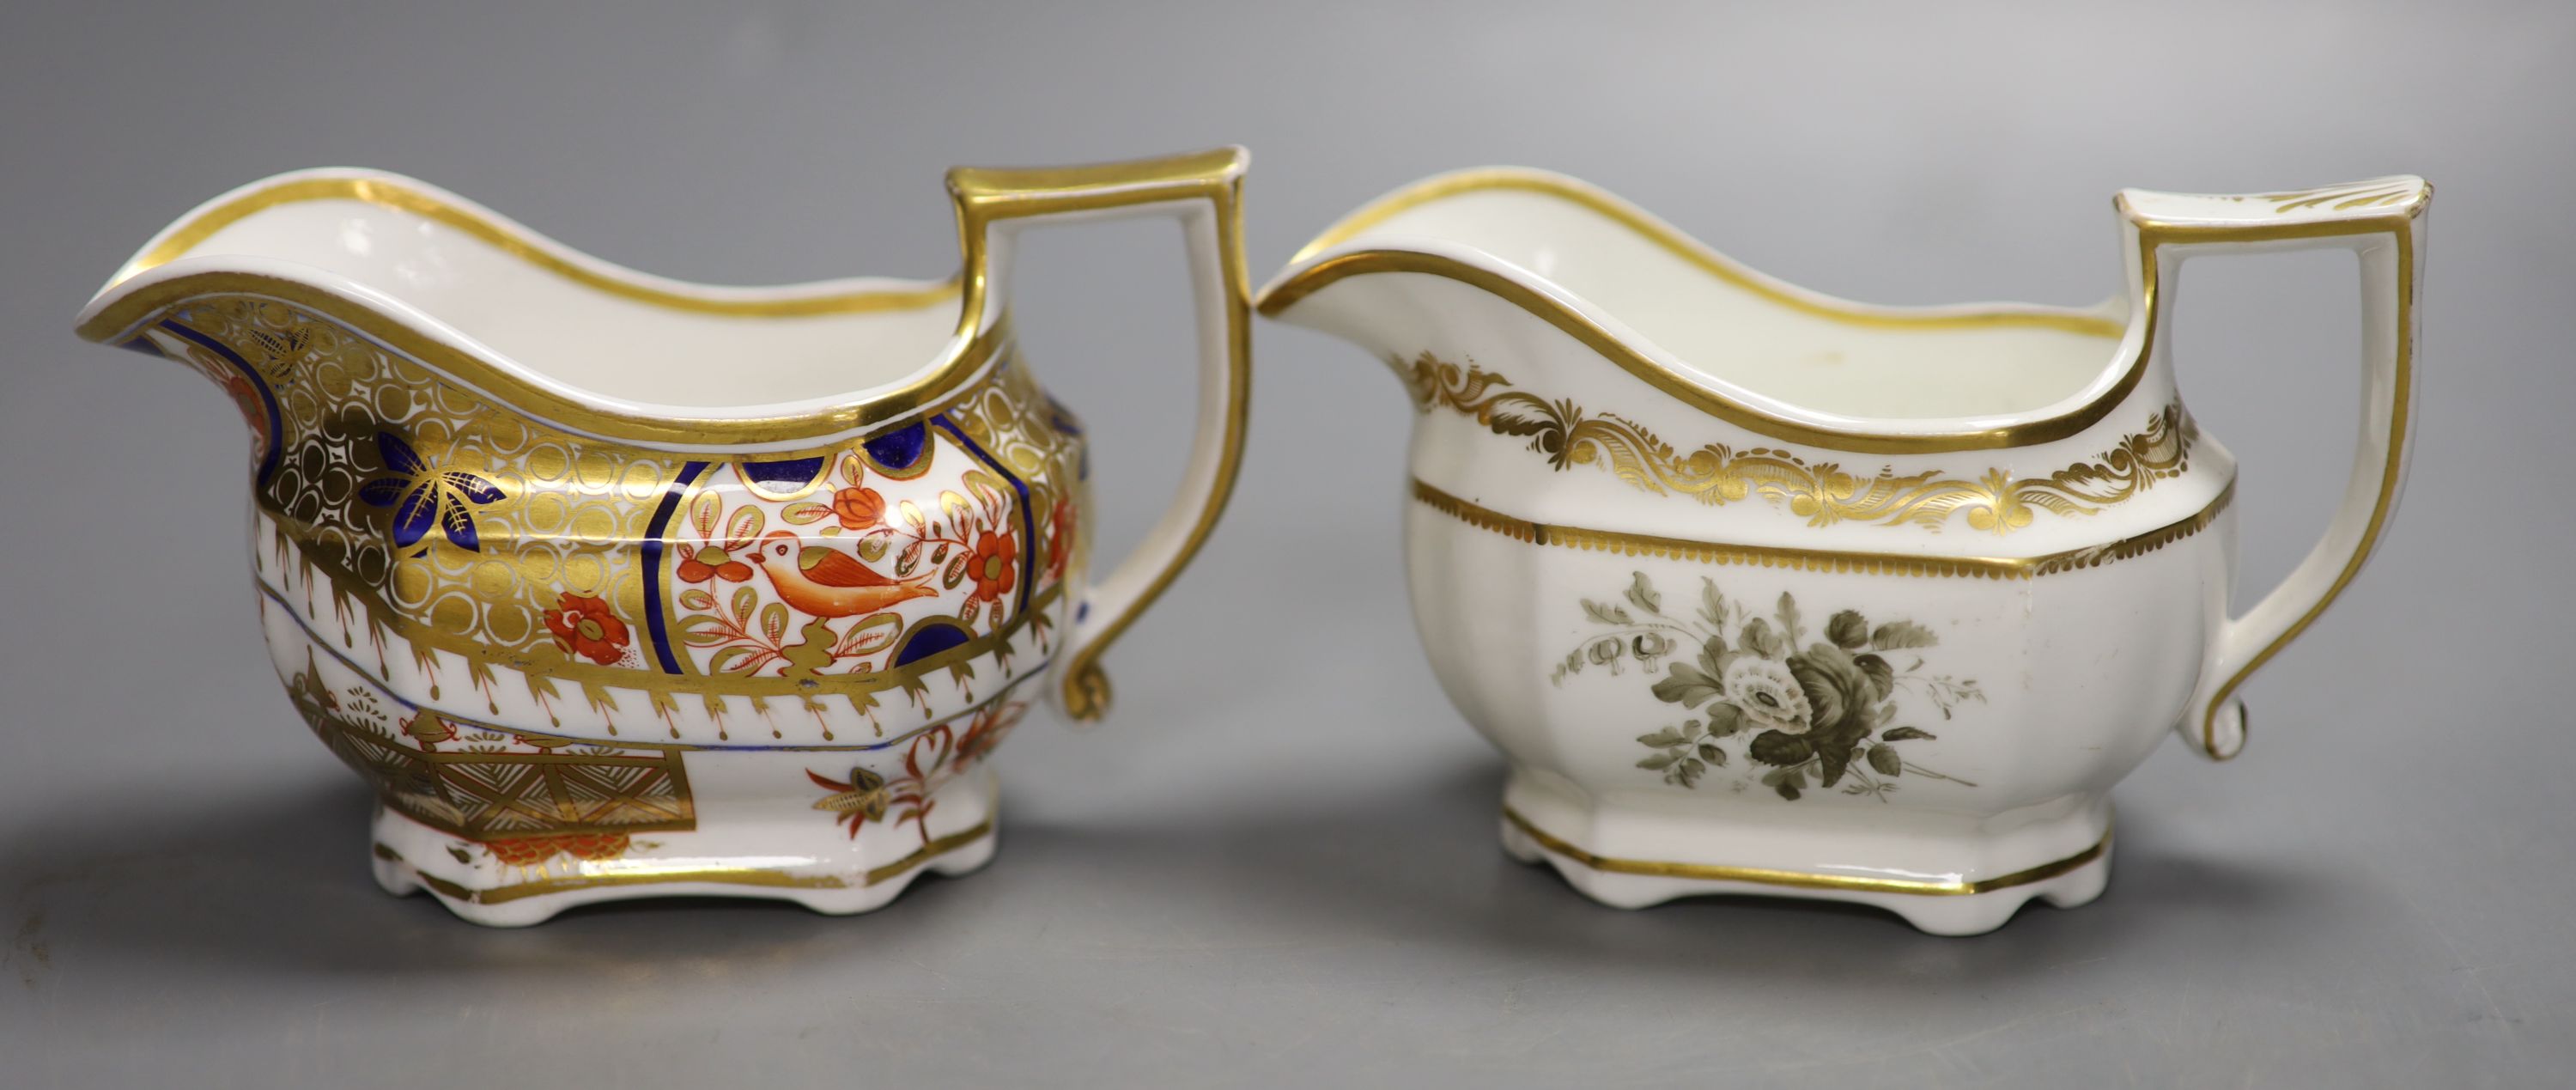 A Spode cream jug painted with Imari pattern 1495, and a Spode cream jug painted with sepia - Image 2 of 4